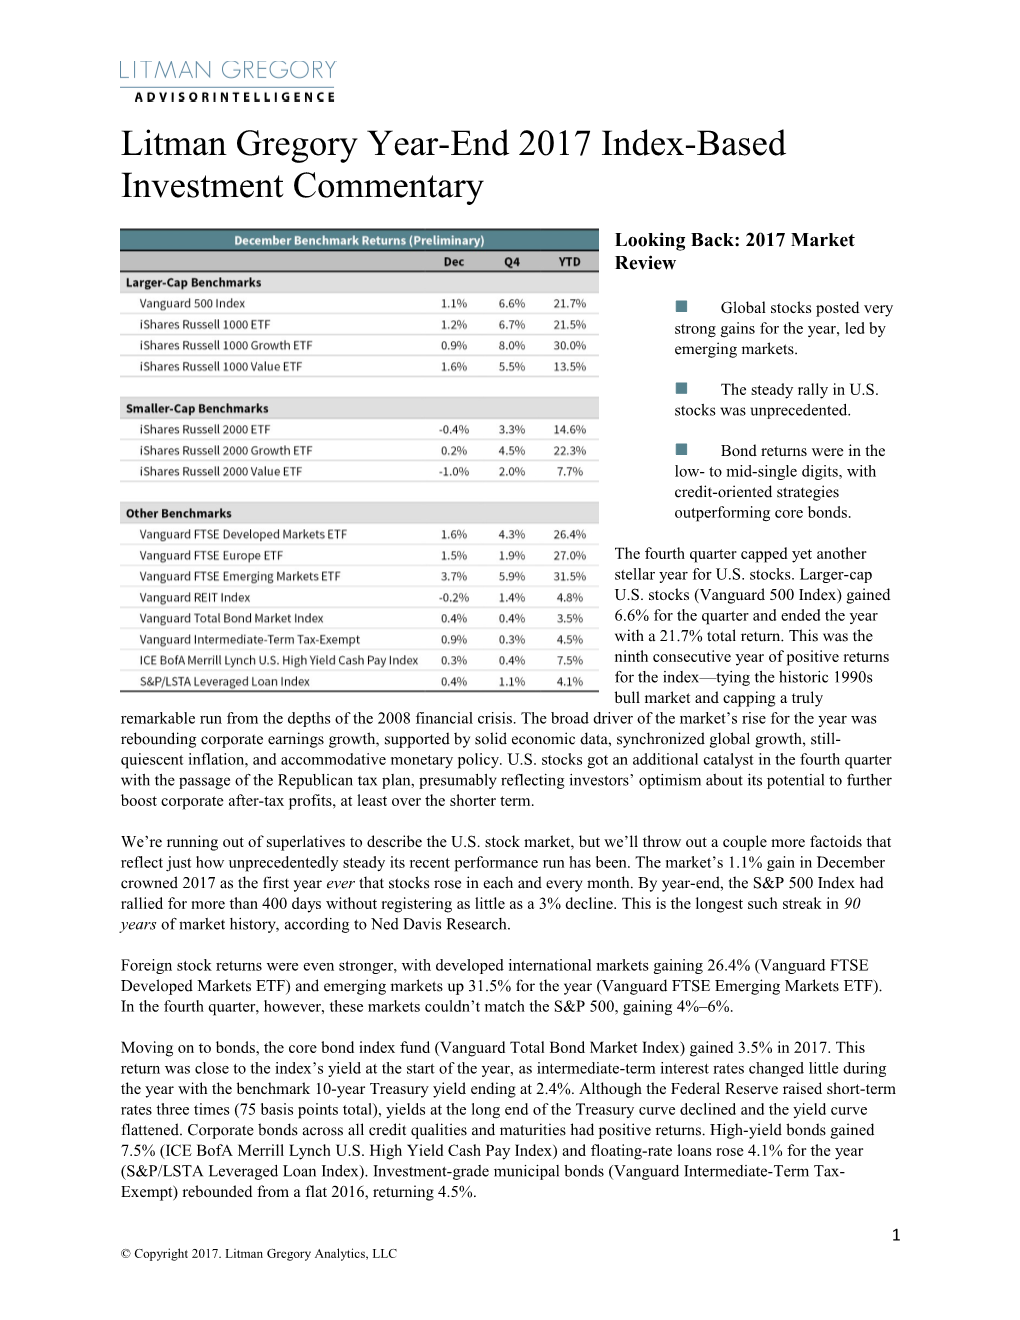 Litman Gregory Year-End 2017 Index-Based Investment Commentary